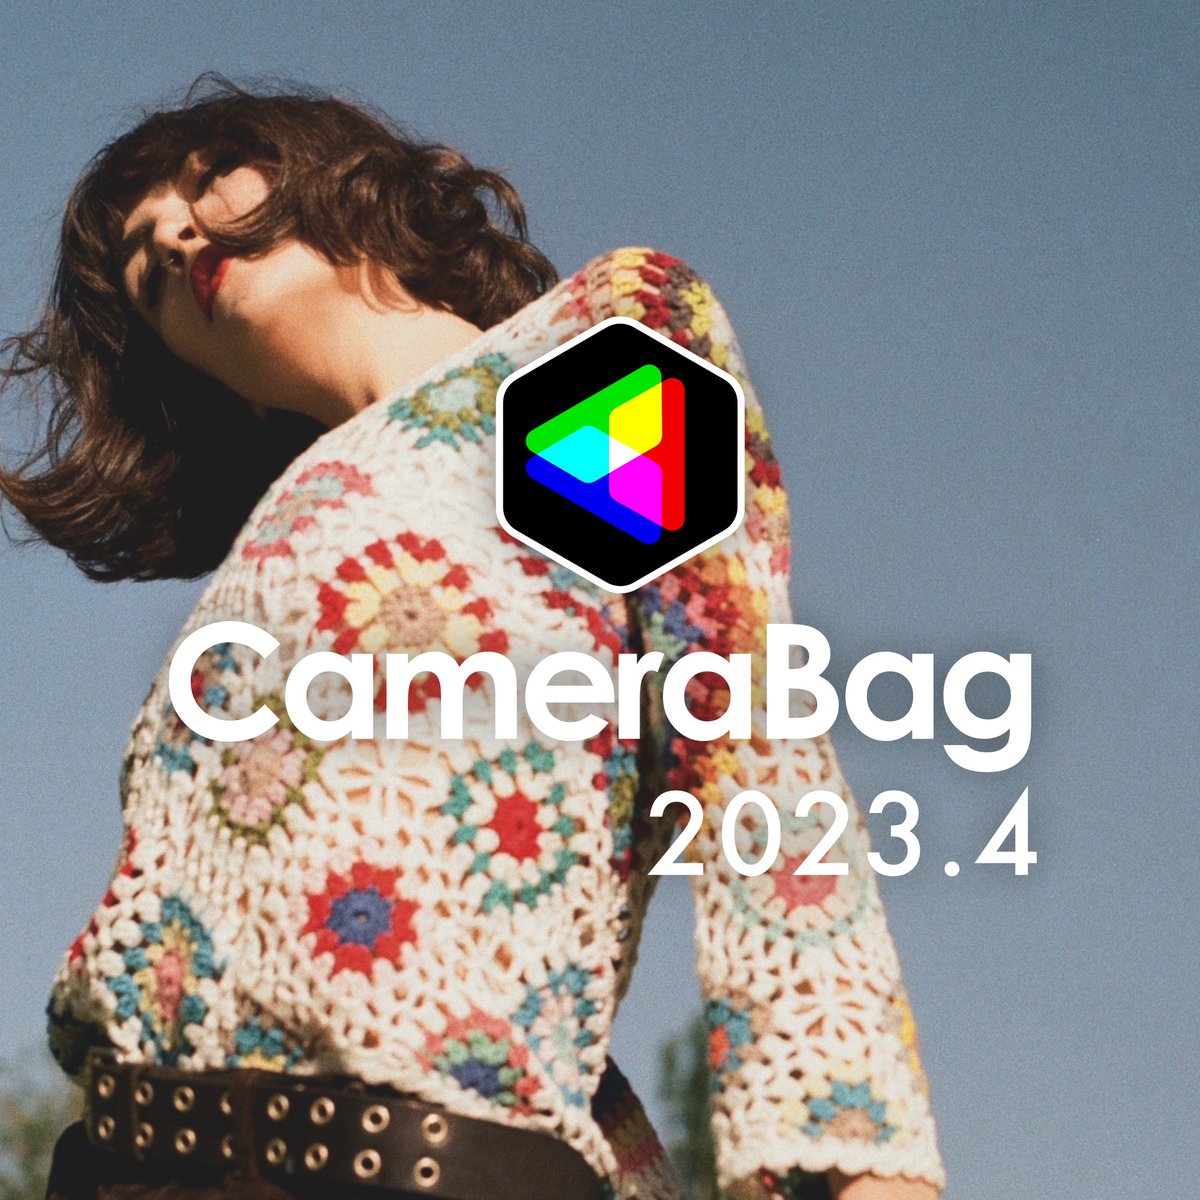 CameraBag 2023.4 is here! NEW Toolkits Presets plus native support for Apple's M1/M2 processors! ➡️ Update/try it: nevercenter.com/camerabag 🎥 Release vid: youtu.be/OtqeRDXiGAo #photography #photoeditor #photoediting #photoshop #lightroom #apple #intel #silicon